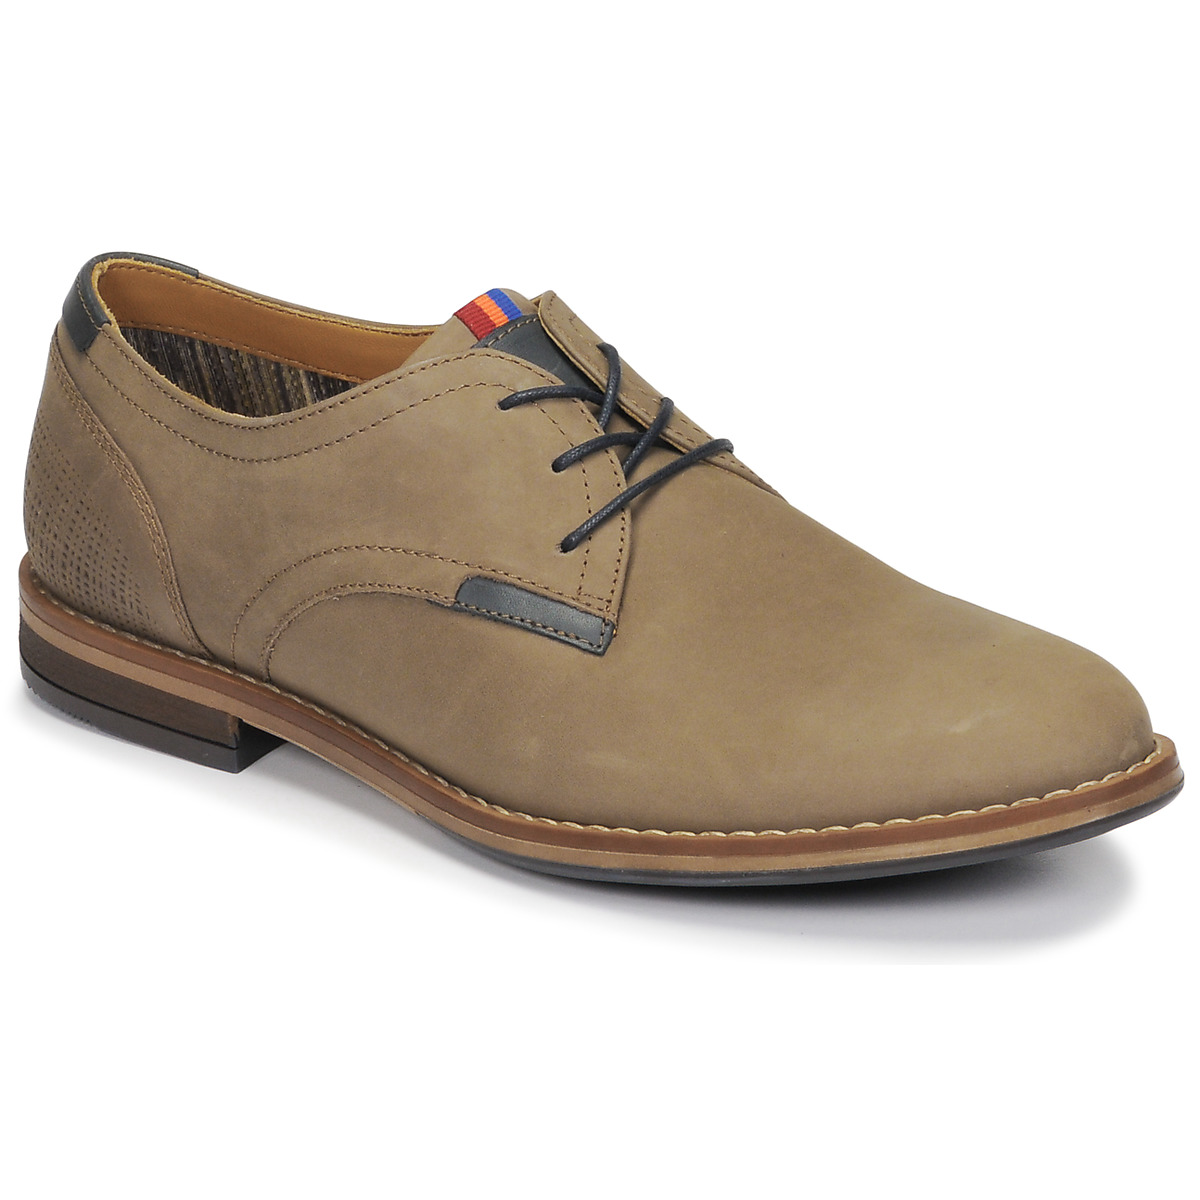 Schoenen Heren Derby André TITO Taupe